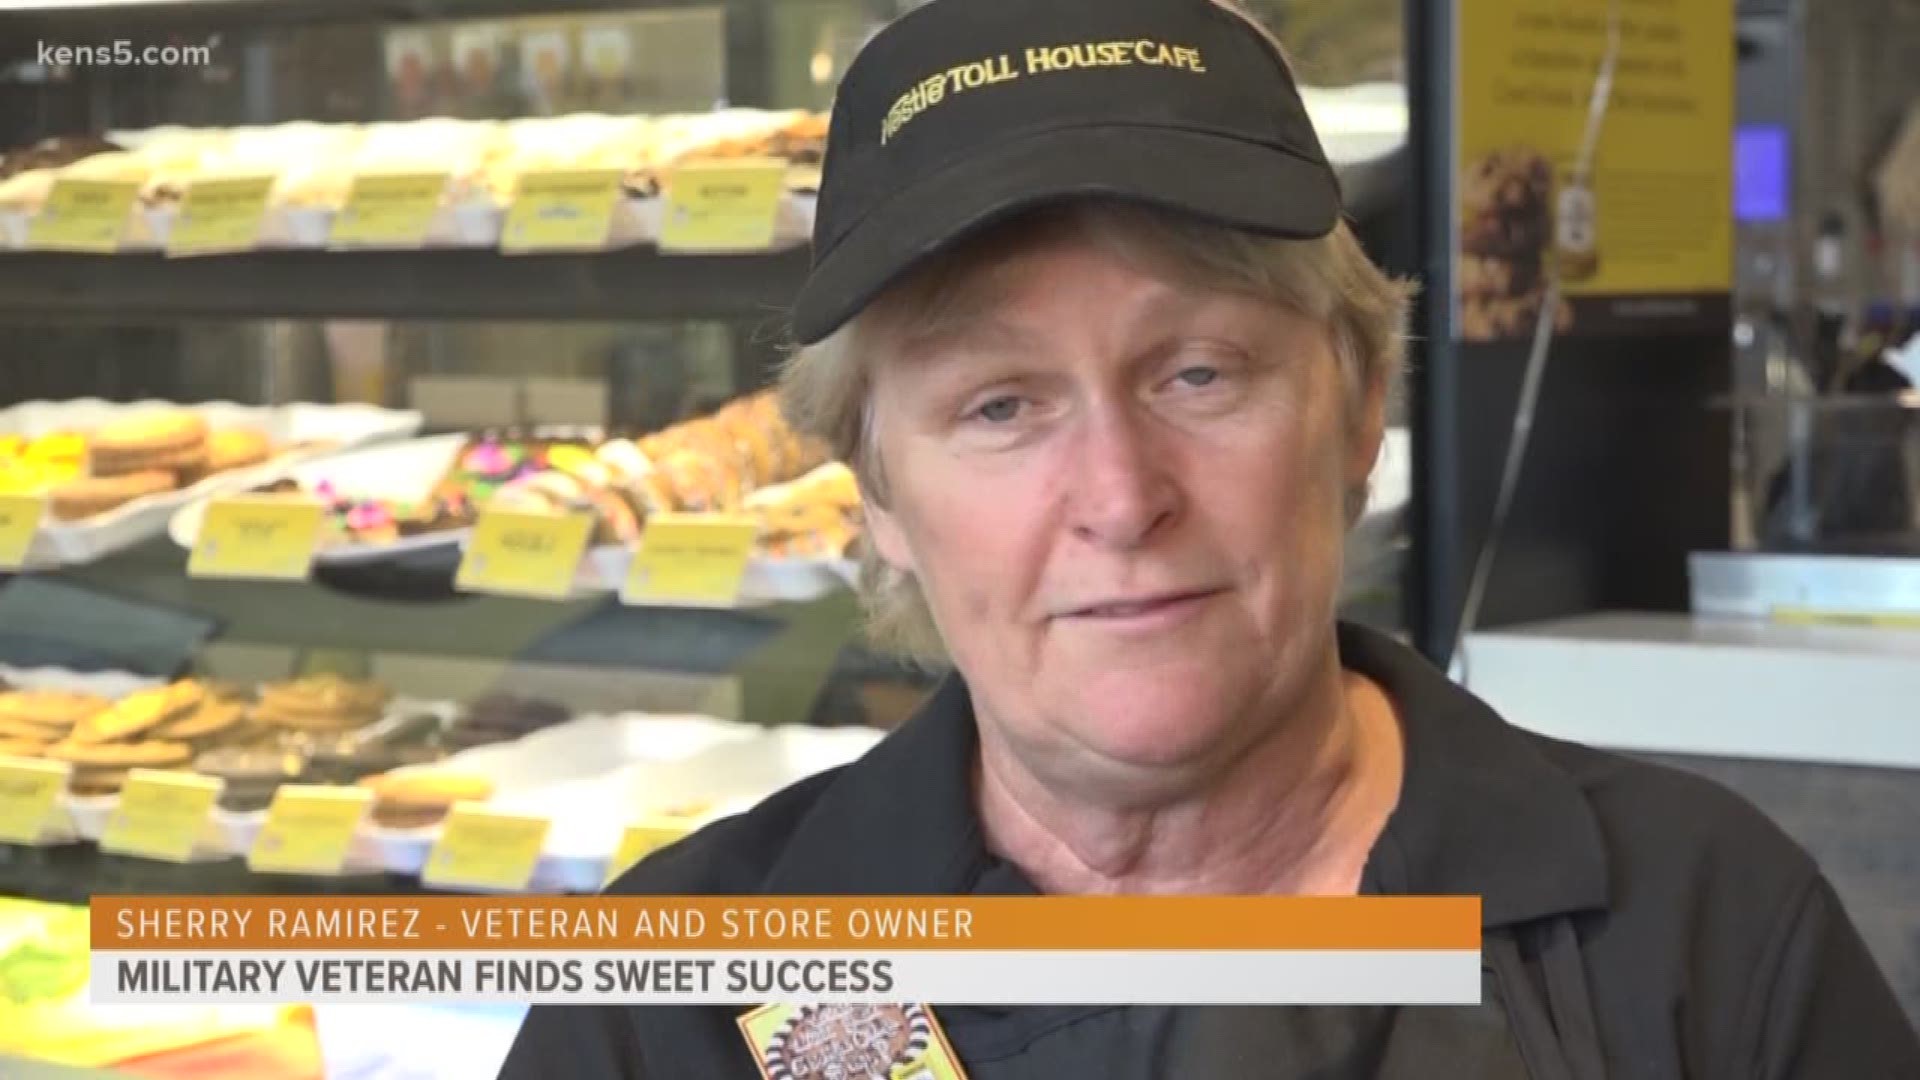 A military veteran has opened her own business, San Antonio's first Nestle Toll House cafe.